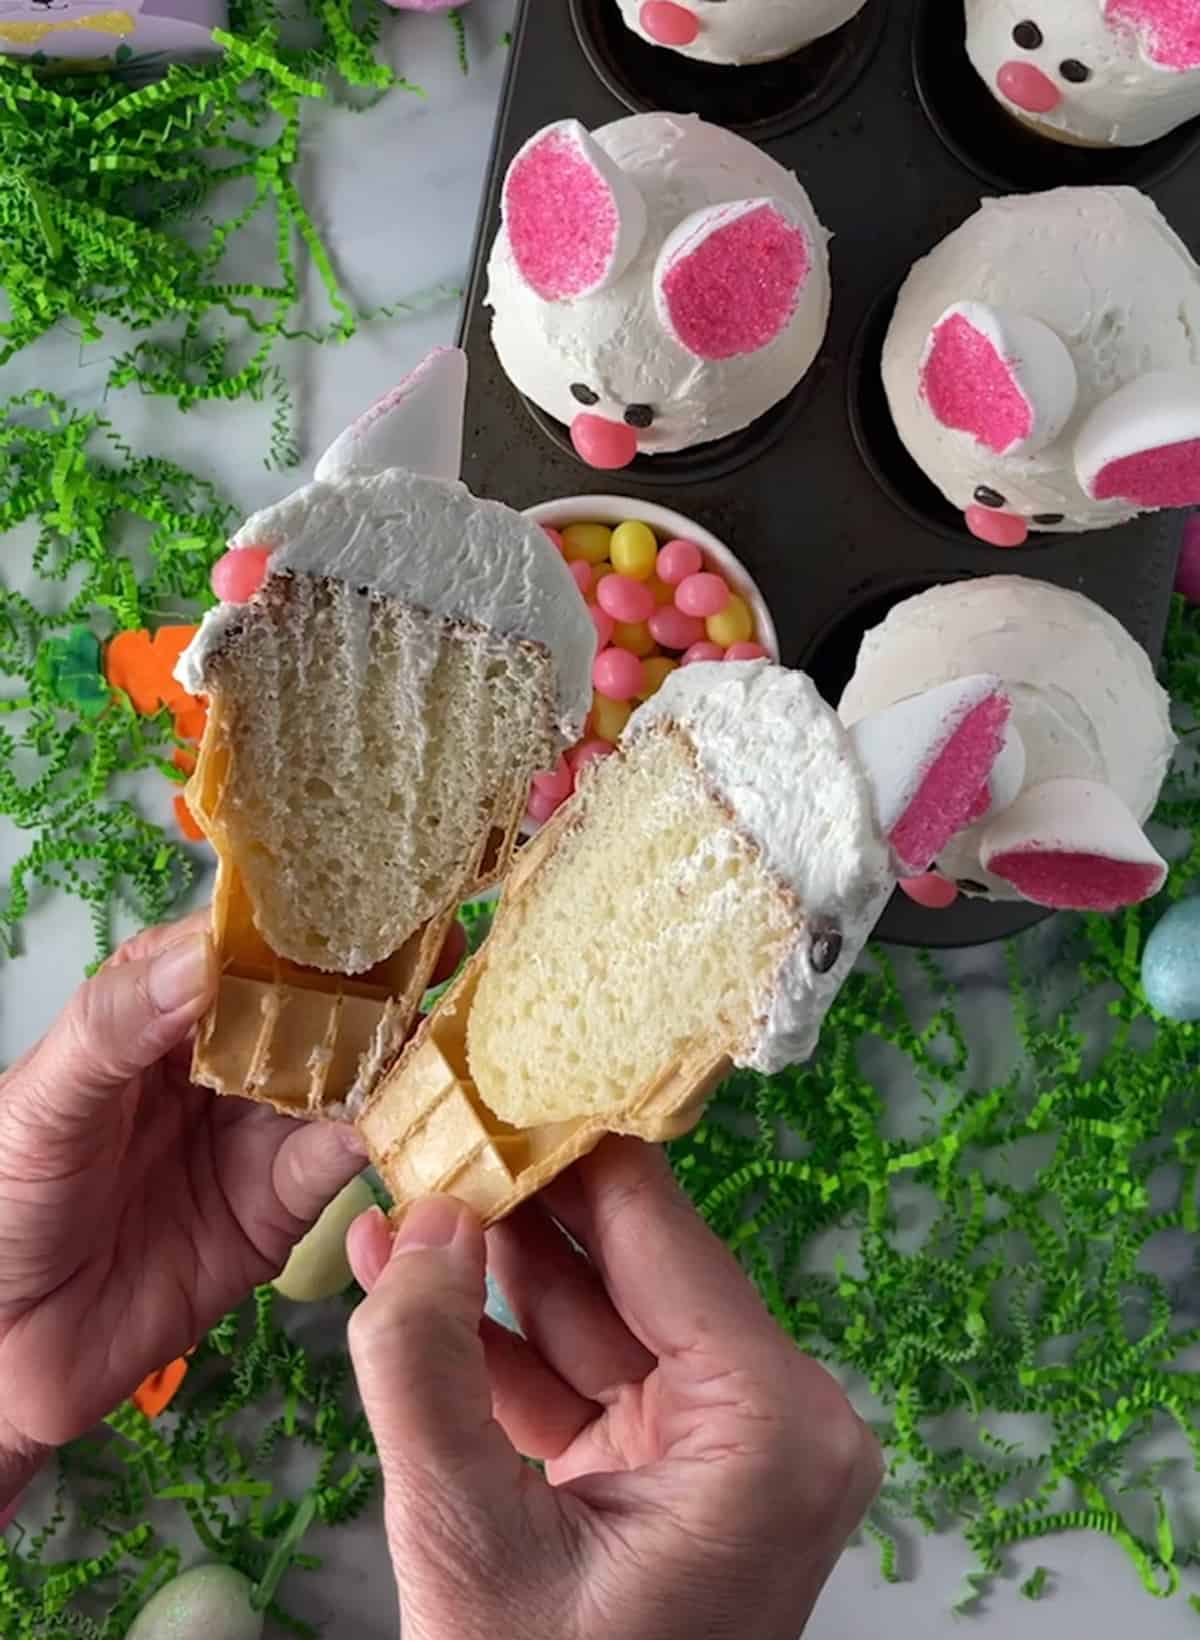 A cupcake baked in cone cut open to show the inside of the cake.